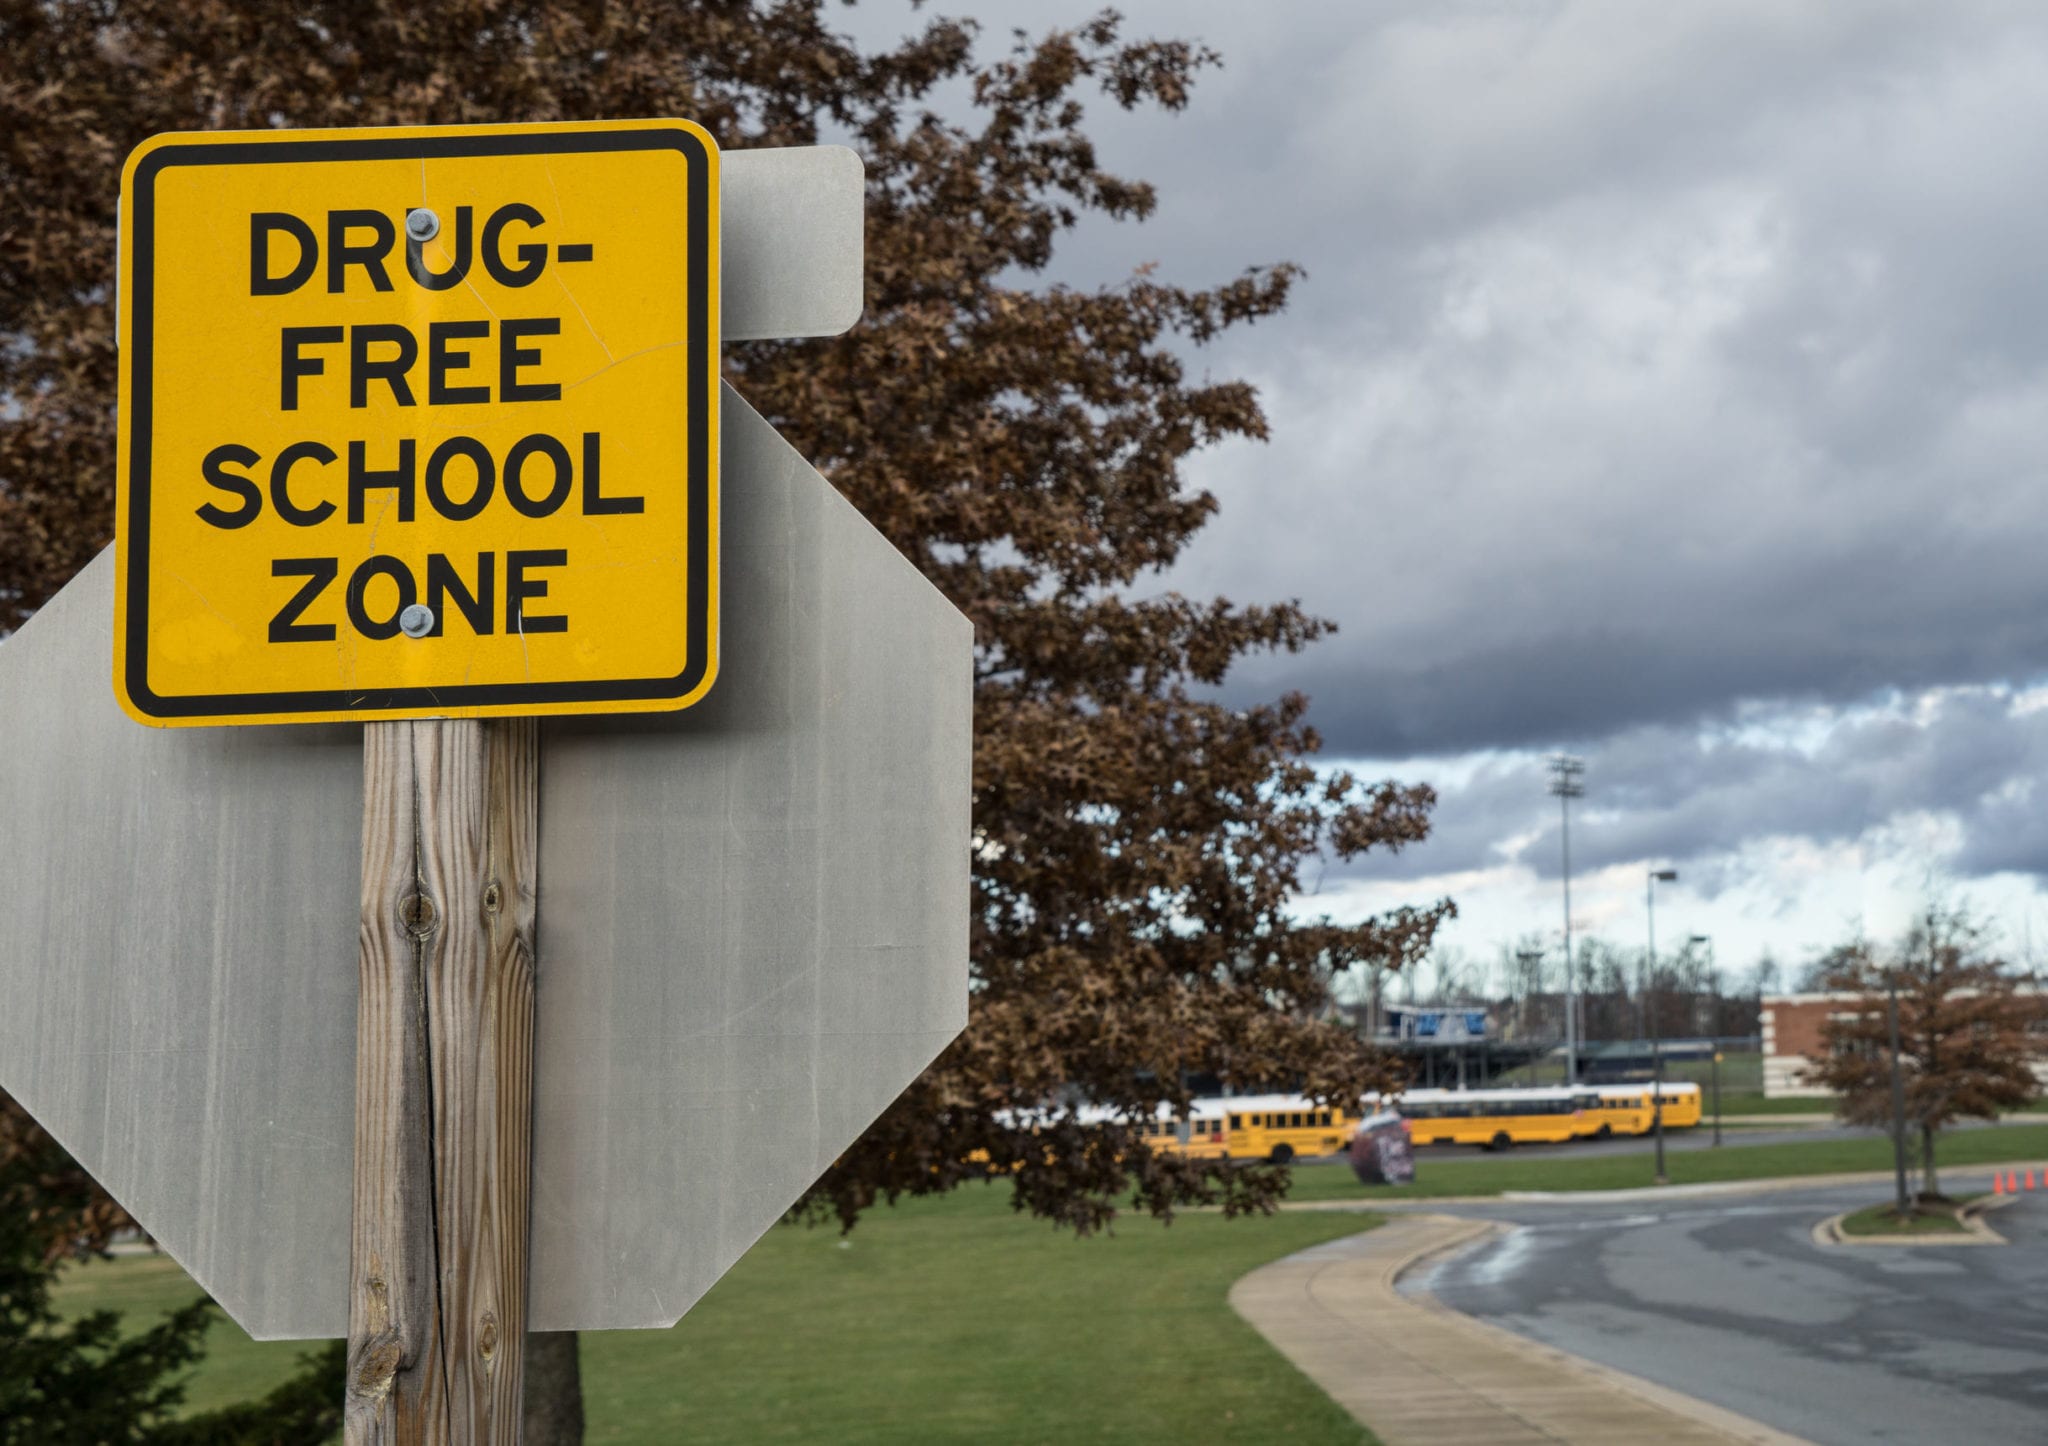 Minnesota’s Drug-Free Zone Laws Designed to be Unfair